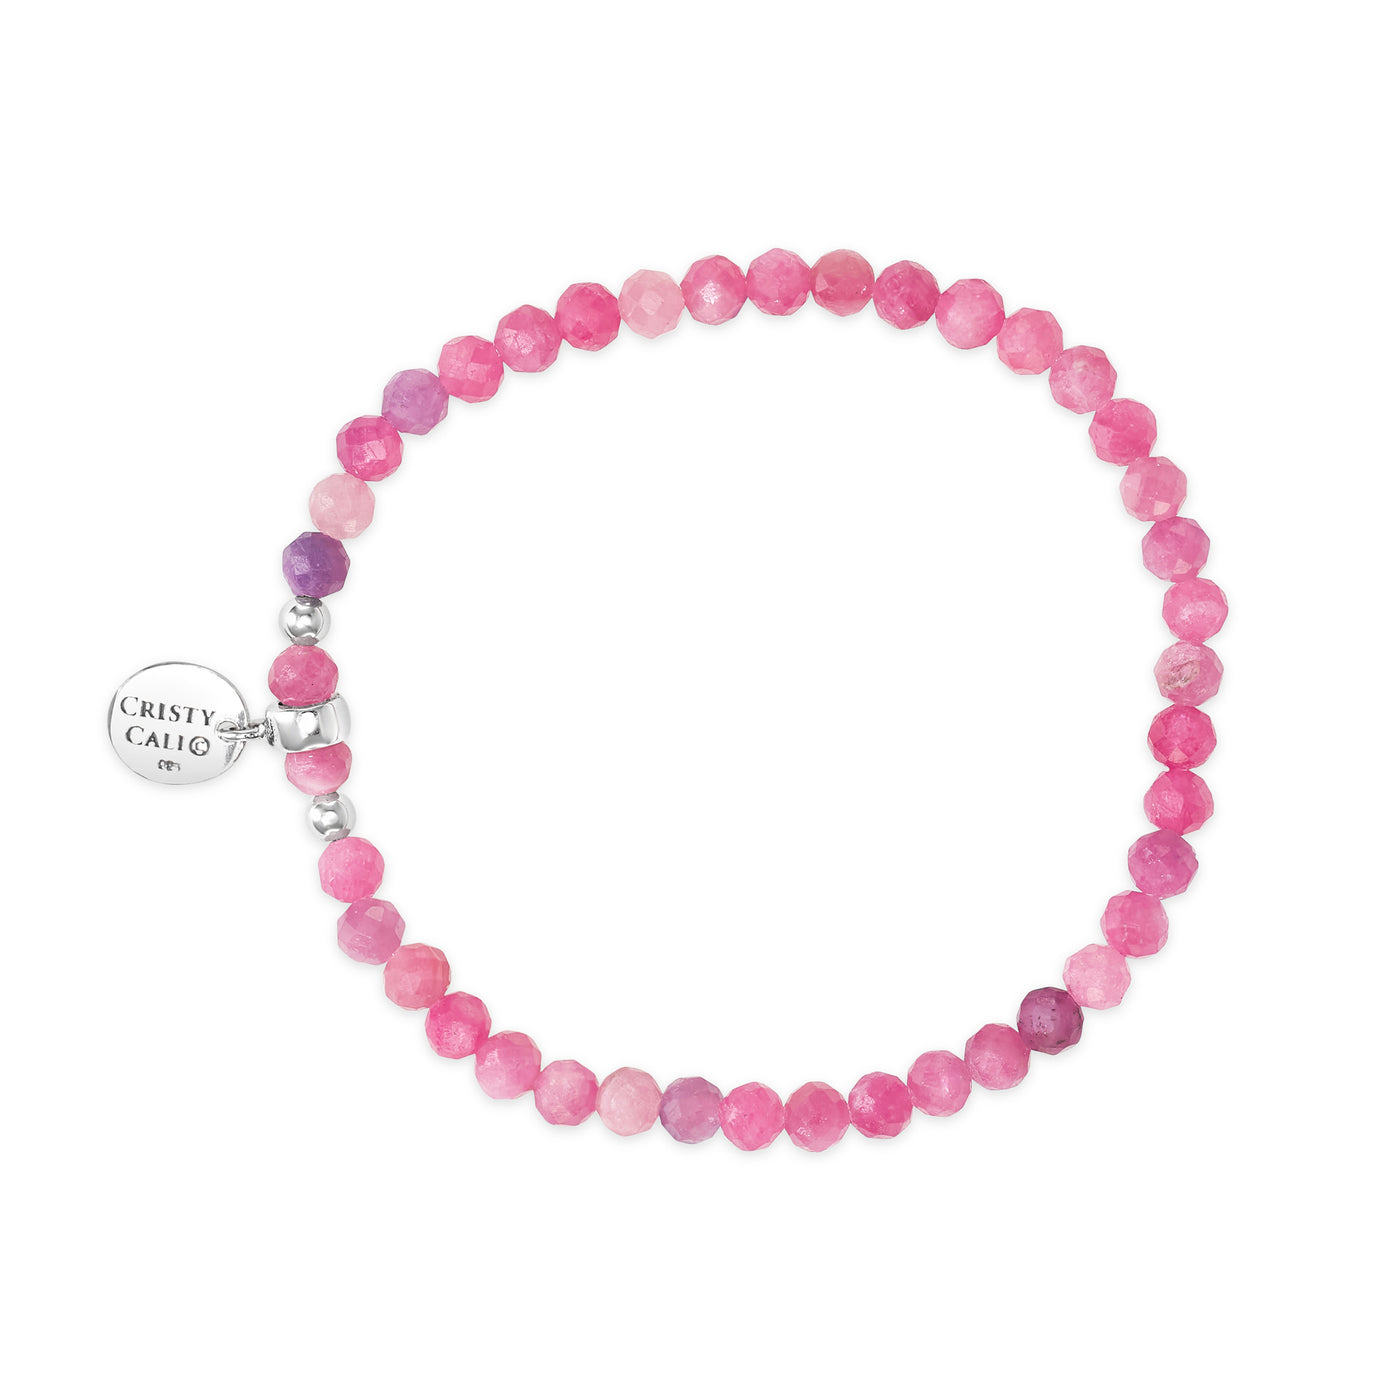 Rubies of Courage Signature Stretch Bracelet